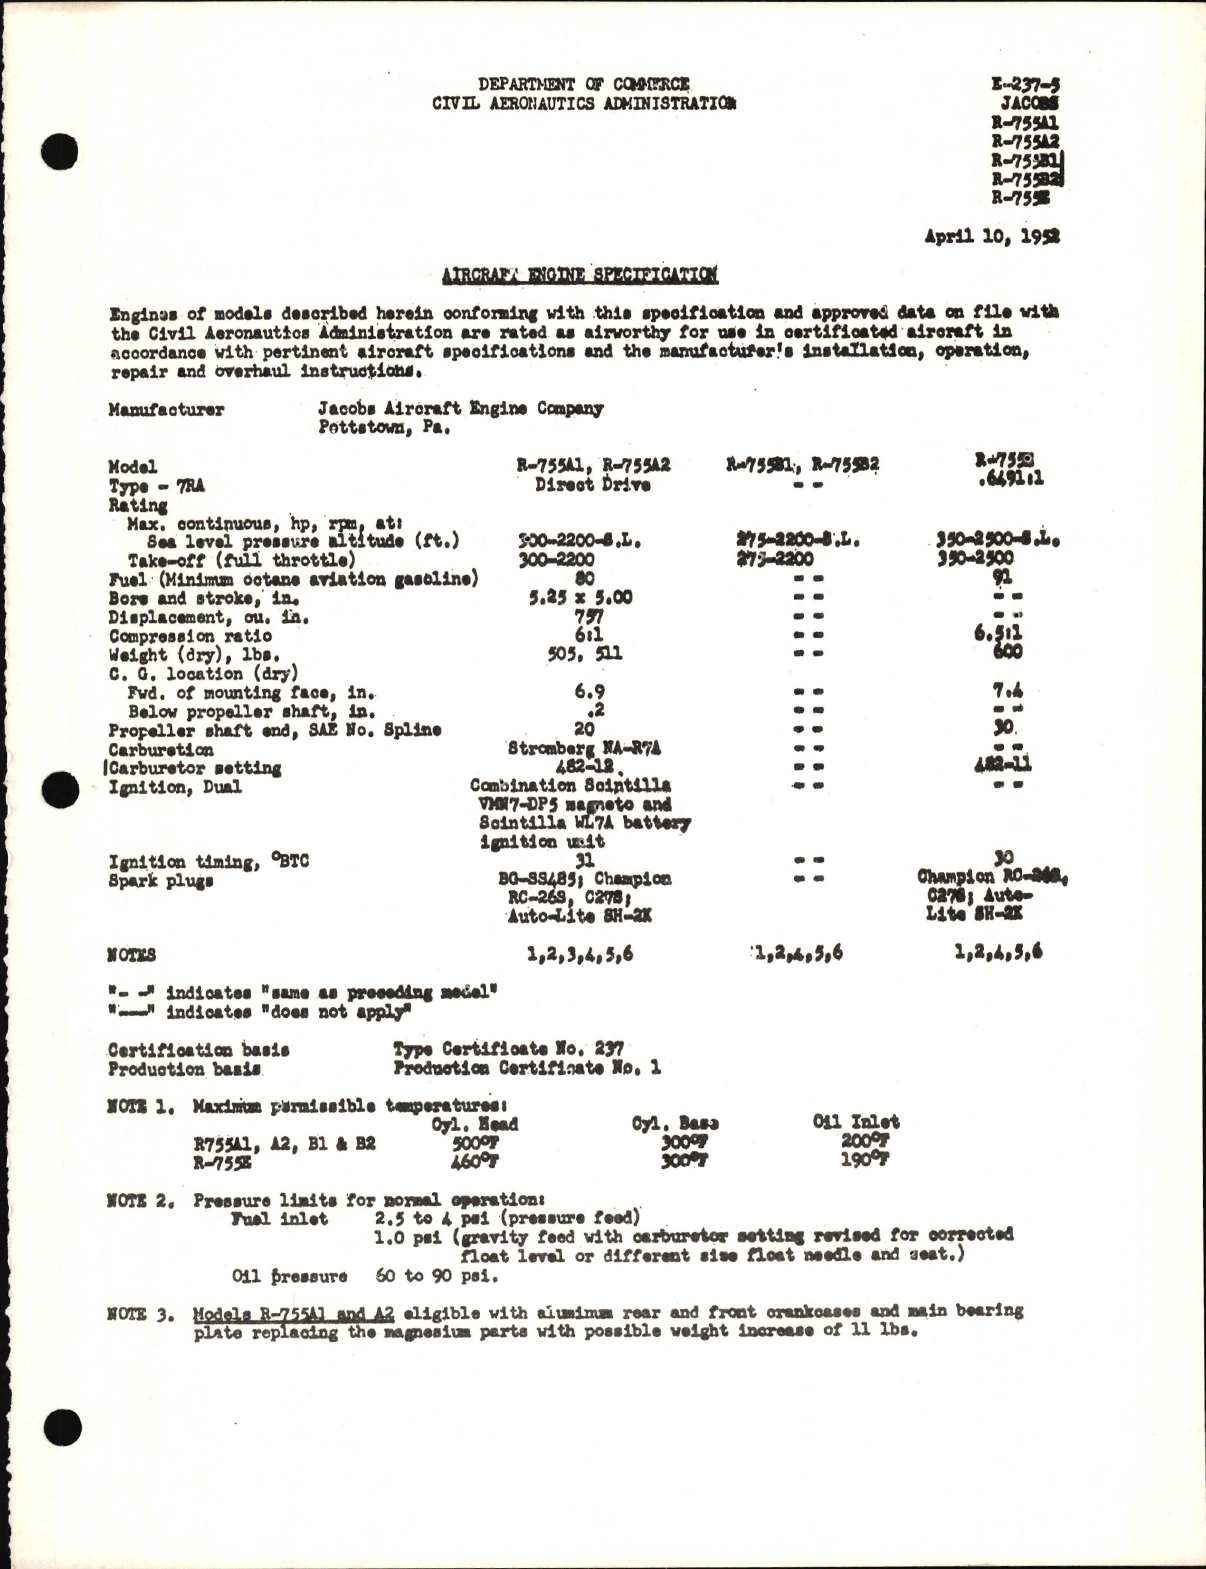 Sample page 1 from AirCorps Library document: R-755